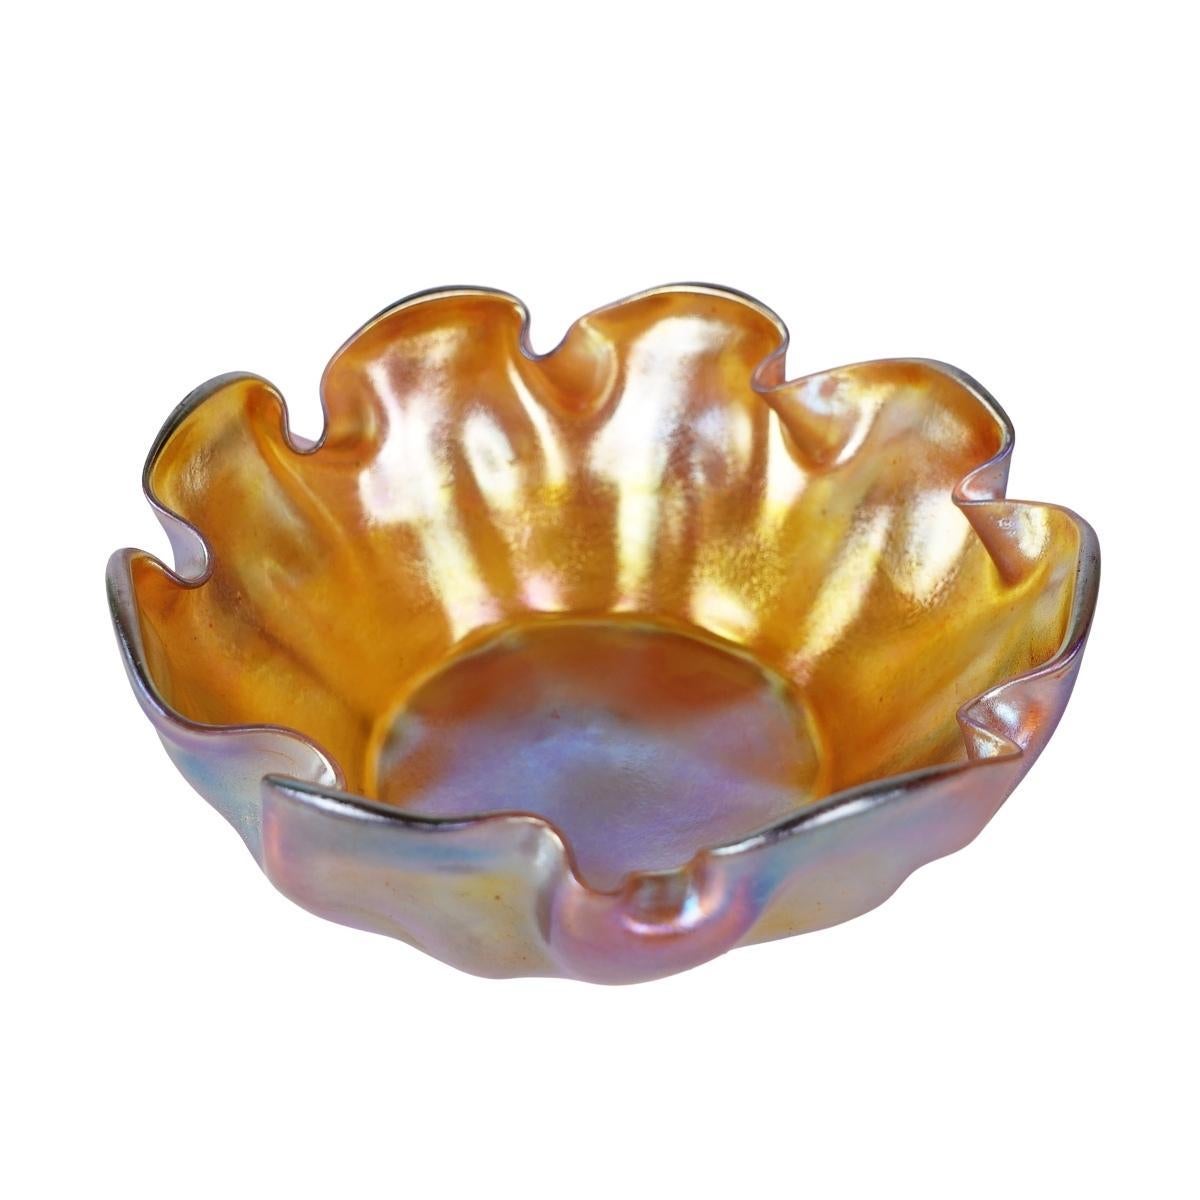 Offering this super nice Louis Comfort Tiffany gold Favrile iridescent art glass bowl. This extra-organic 